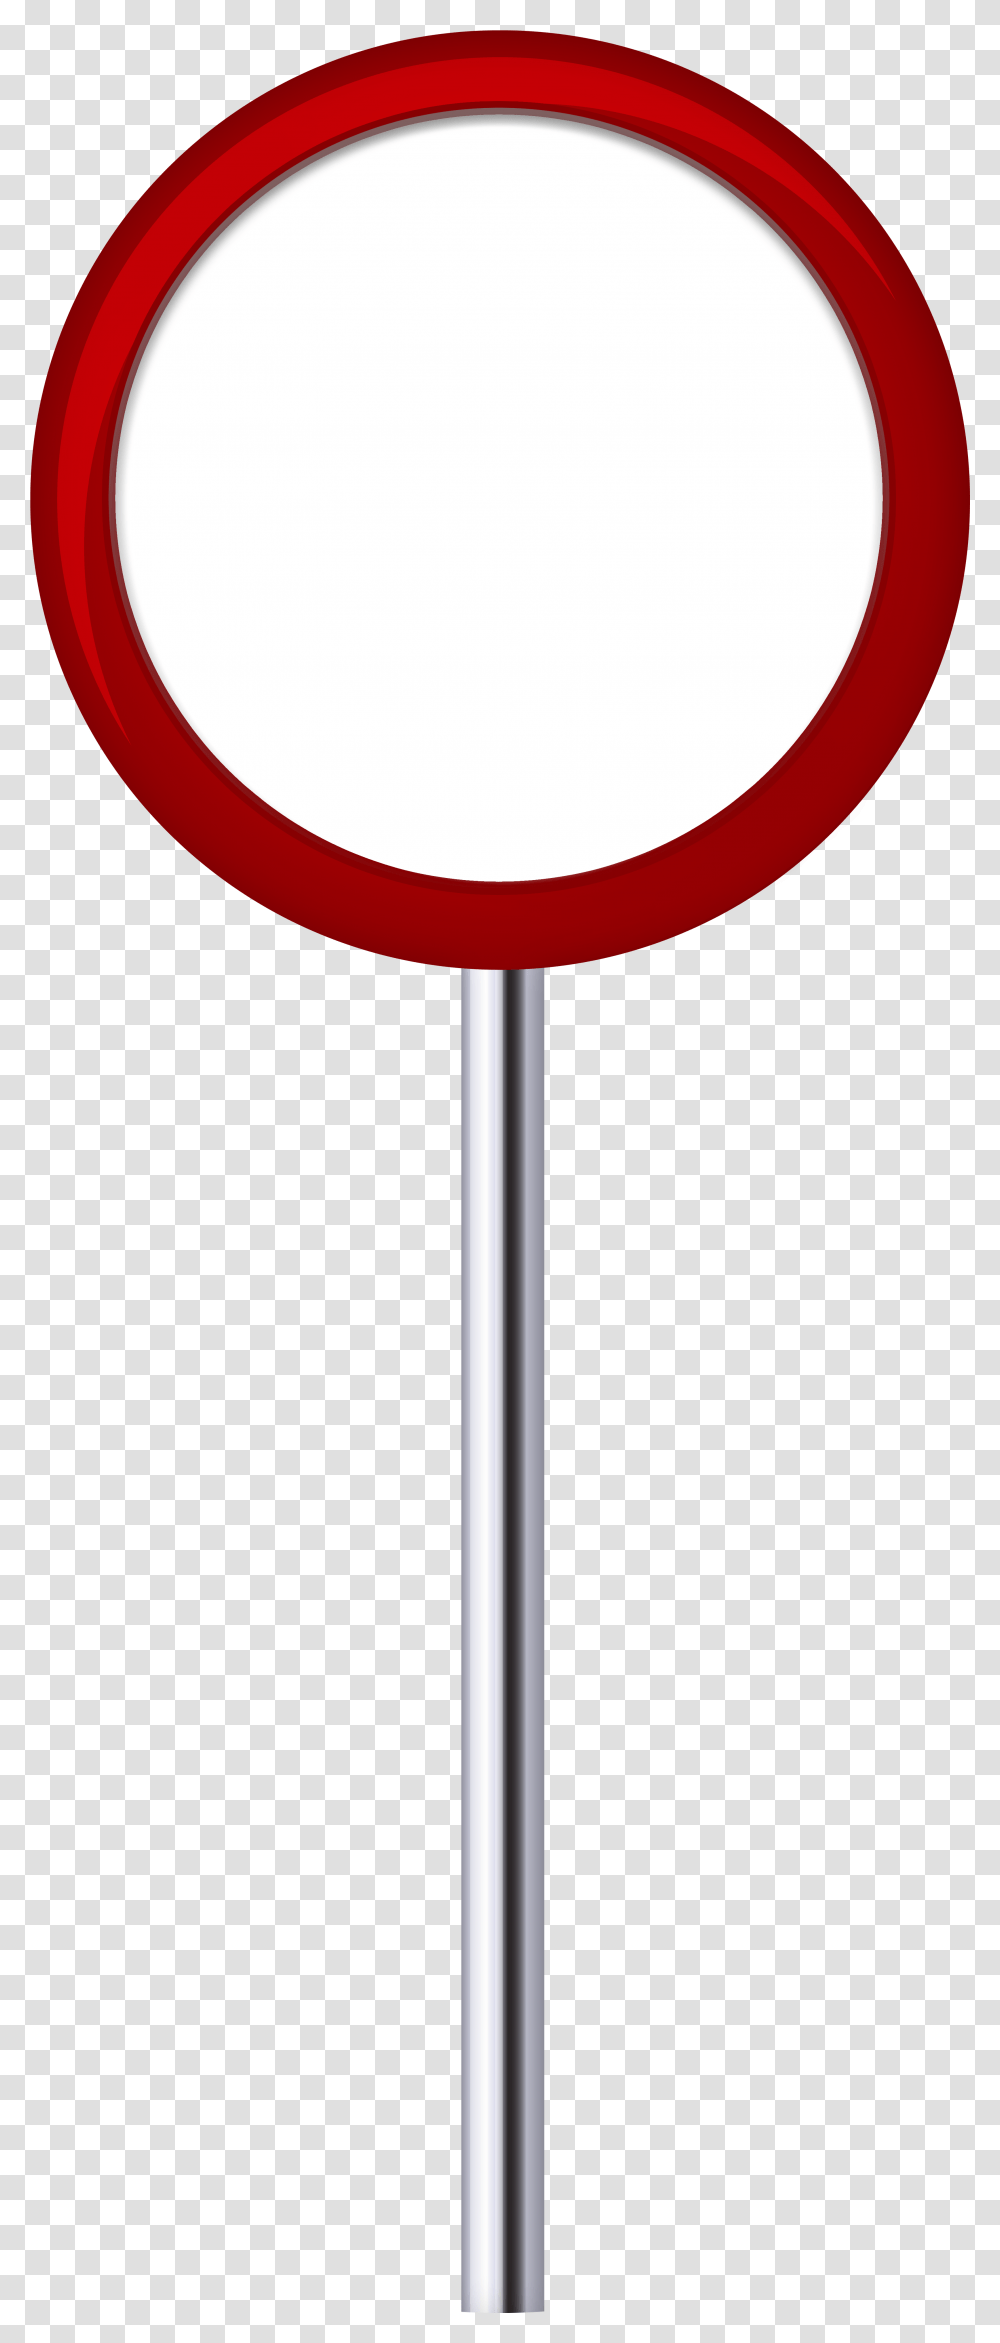 Red Not Allowed Sign Clip Art Open Hands Of God, Food, Candy, Lollipop, Lamp Transparent Png